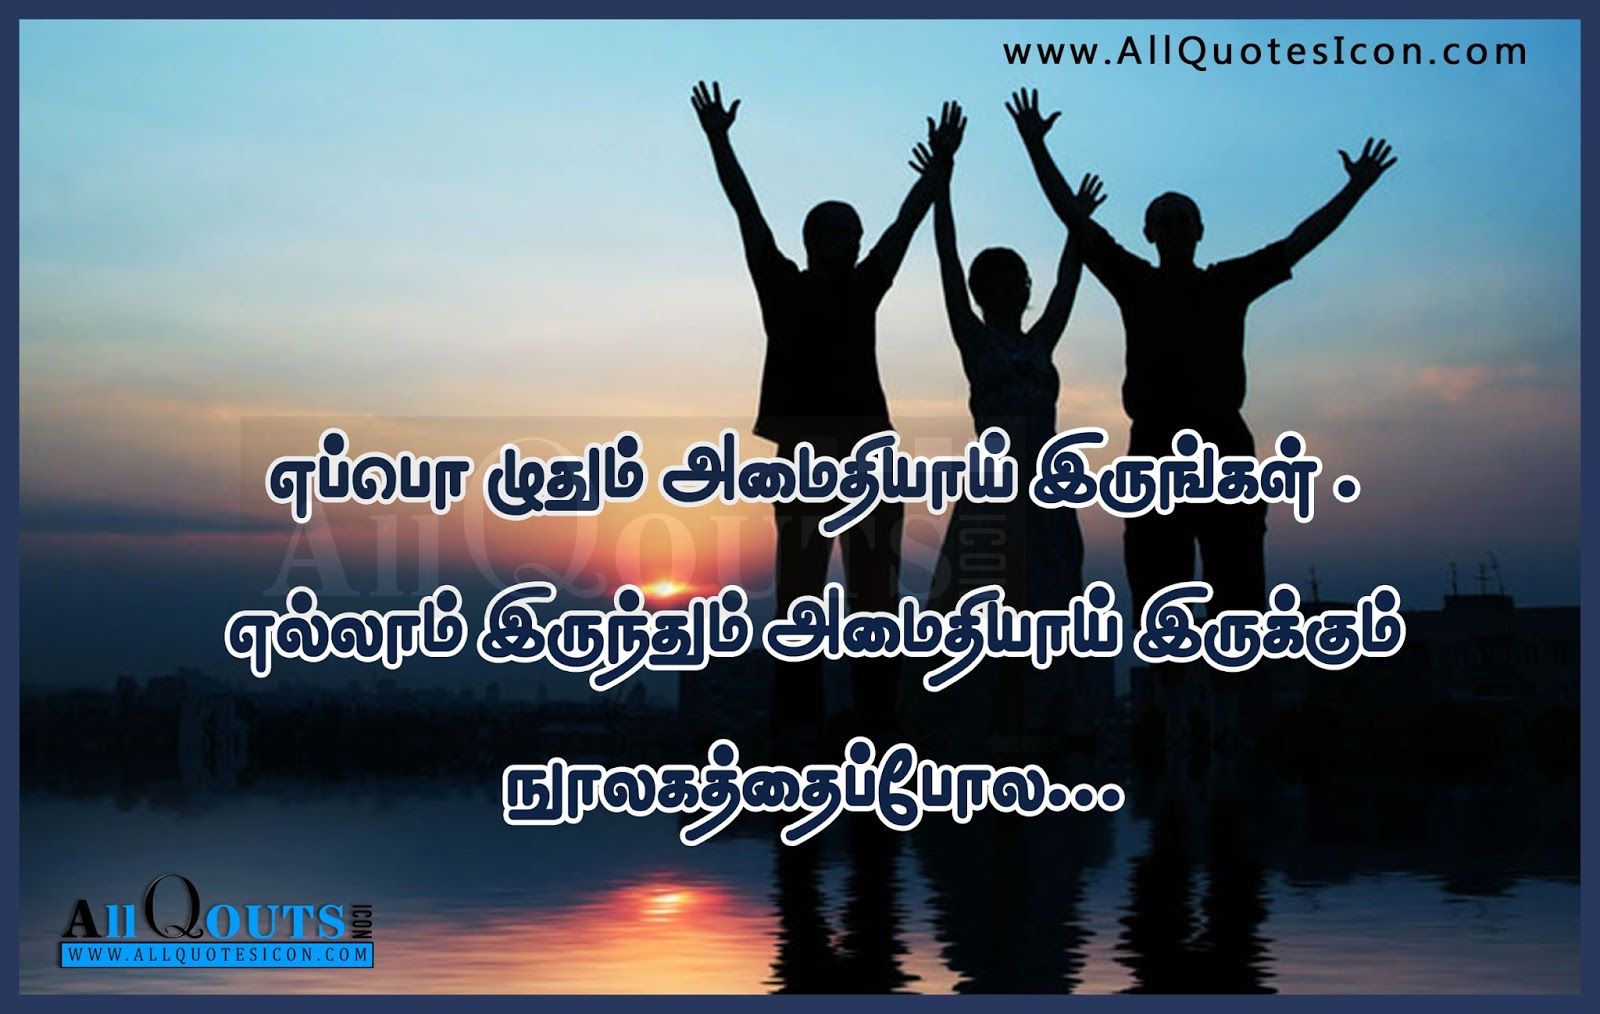 Tamil Friendship Quotes and Image